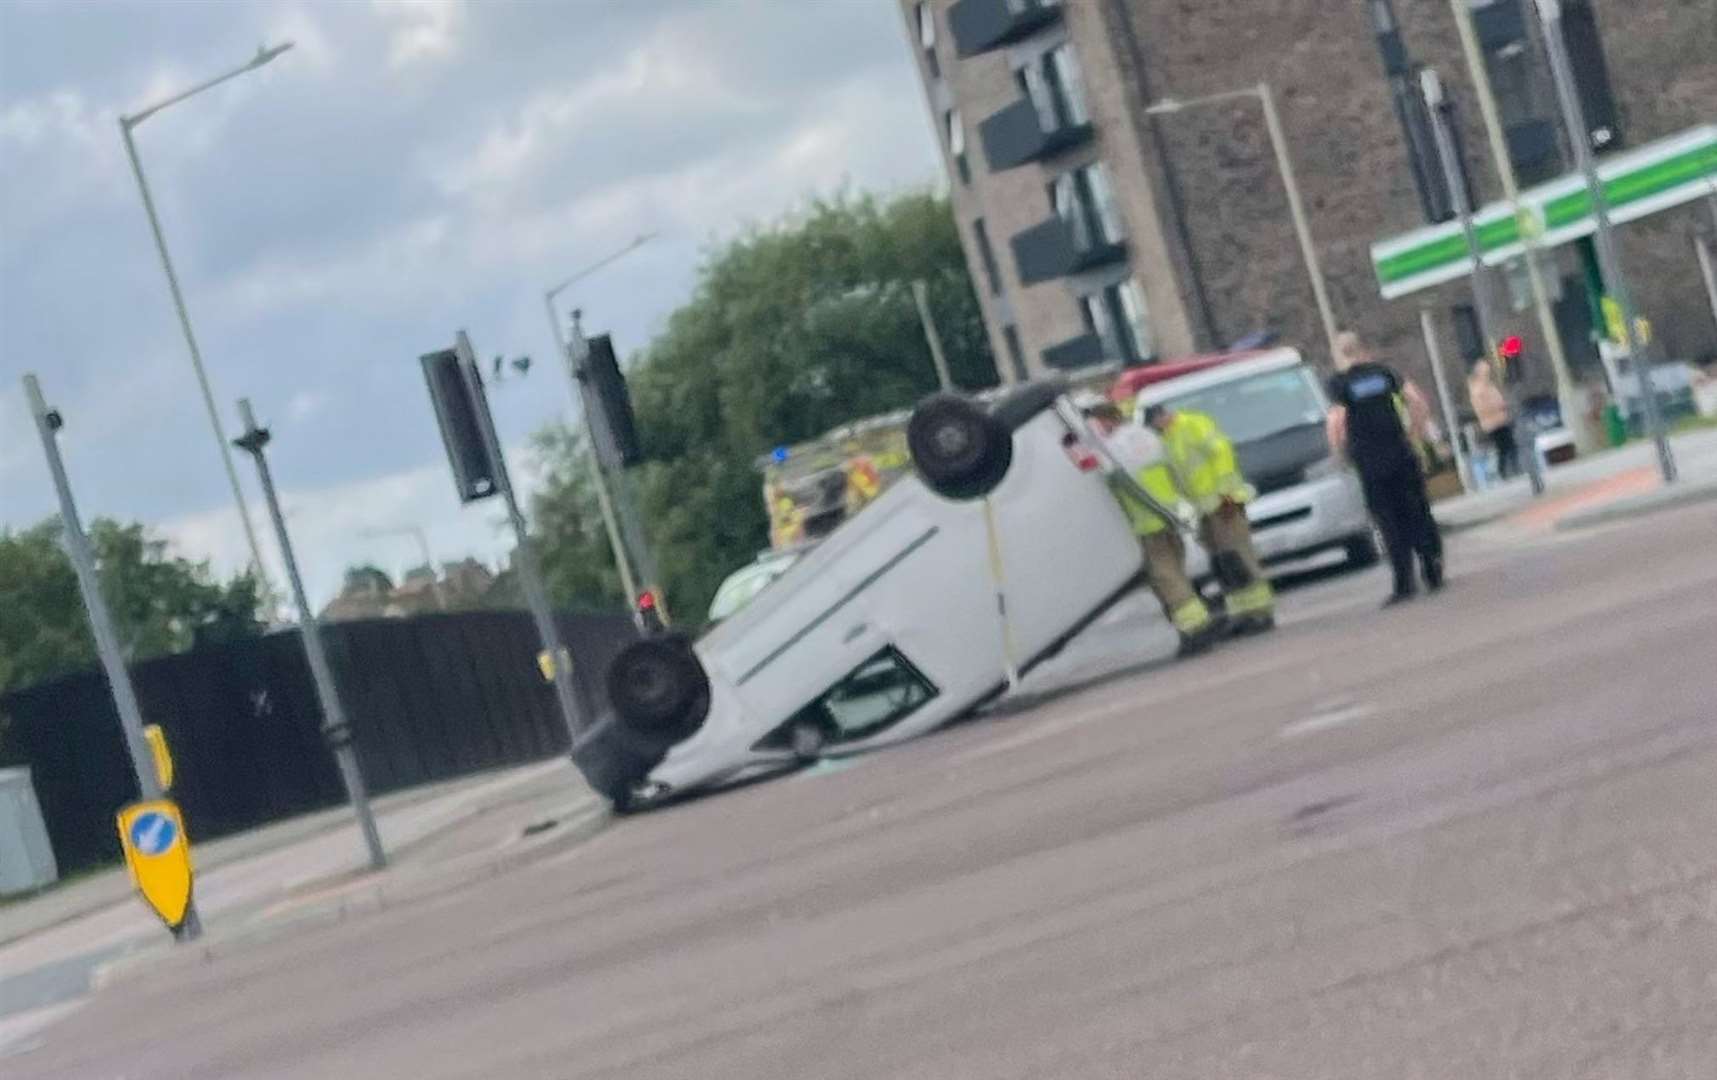 A VW Caddy crashed at a junction in Ashford